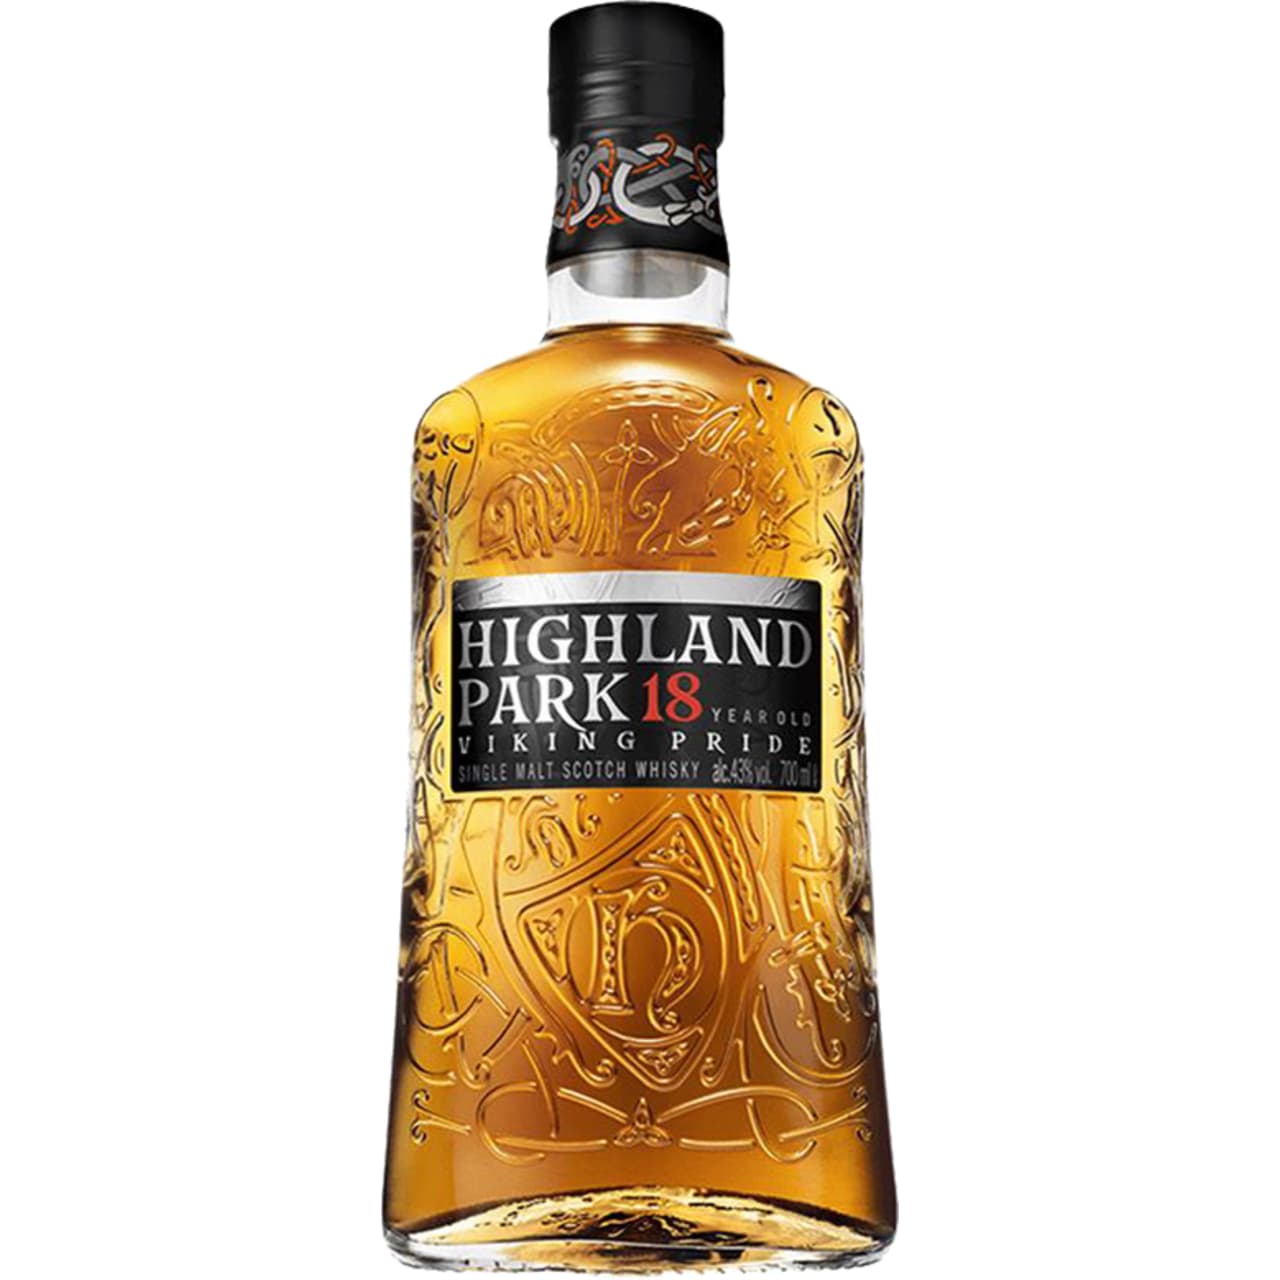 Matured in a high proportion of first-fill sherry seasoned European and American oak casks, this superb 18 Year Old single malt pays tribute to their 5 keystones of production and presents a sophisticated medley of ripe cherries dusted with bittersweet cocoa, freshly harvested honeycomb and candied orange peel.